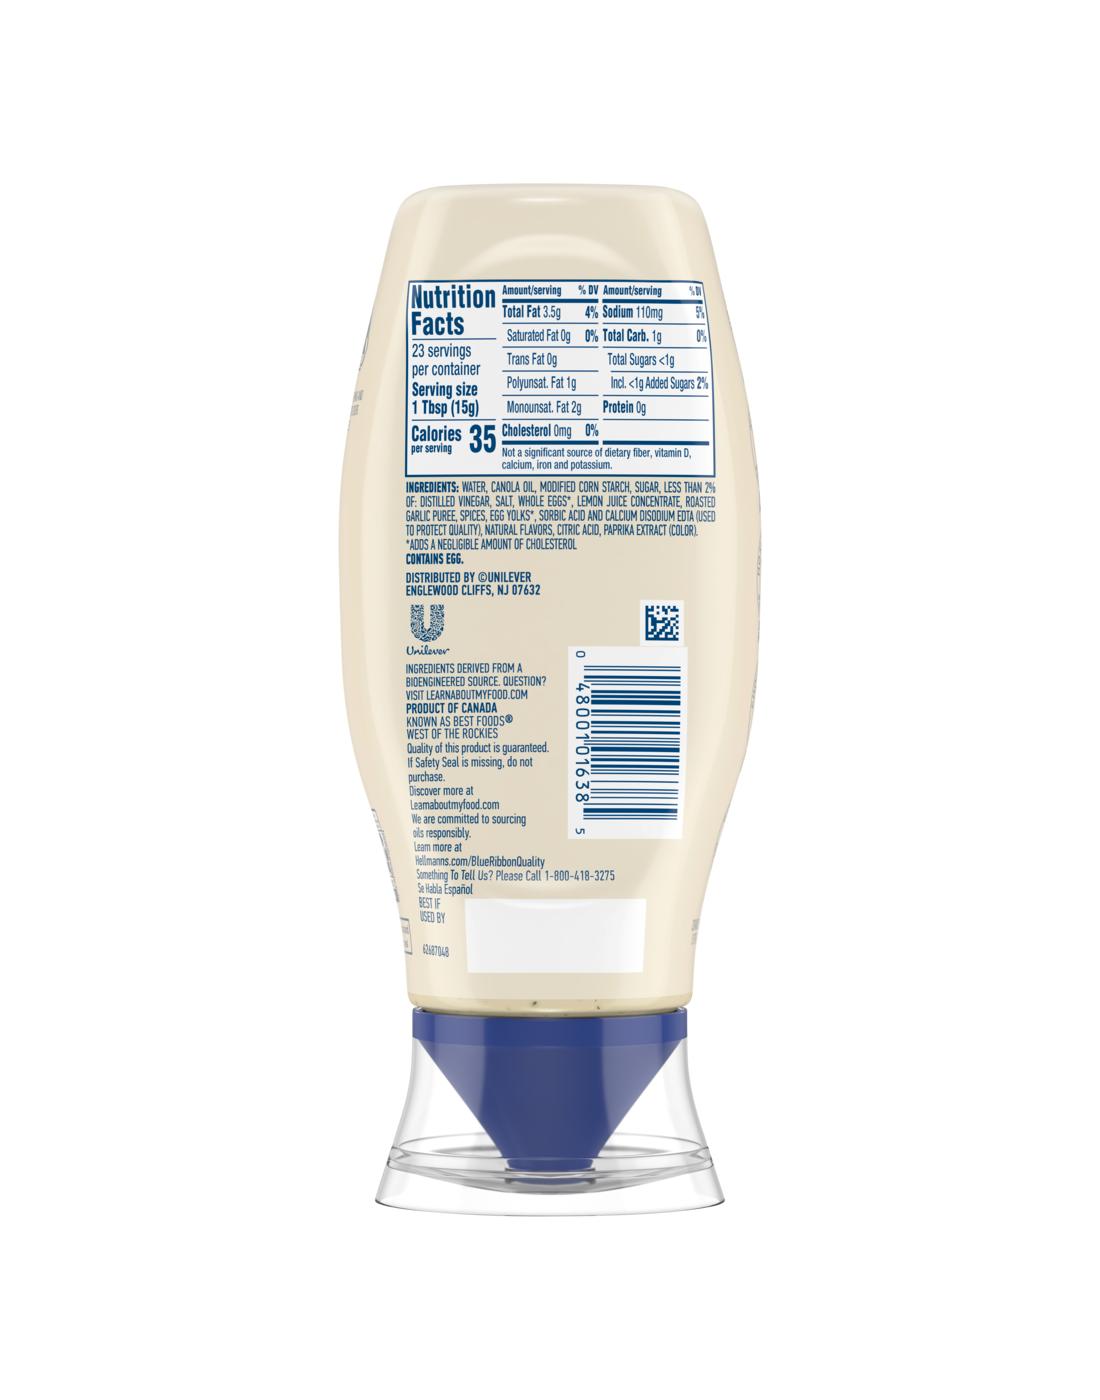 Hellmann's Italian Herb & Garlic Mayonnaise Dressing Squeeze Bottle; image 2 of 2